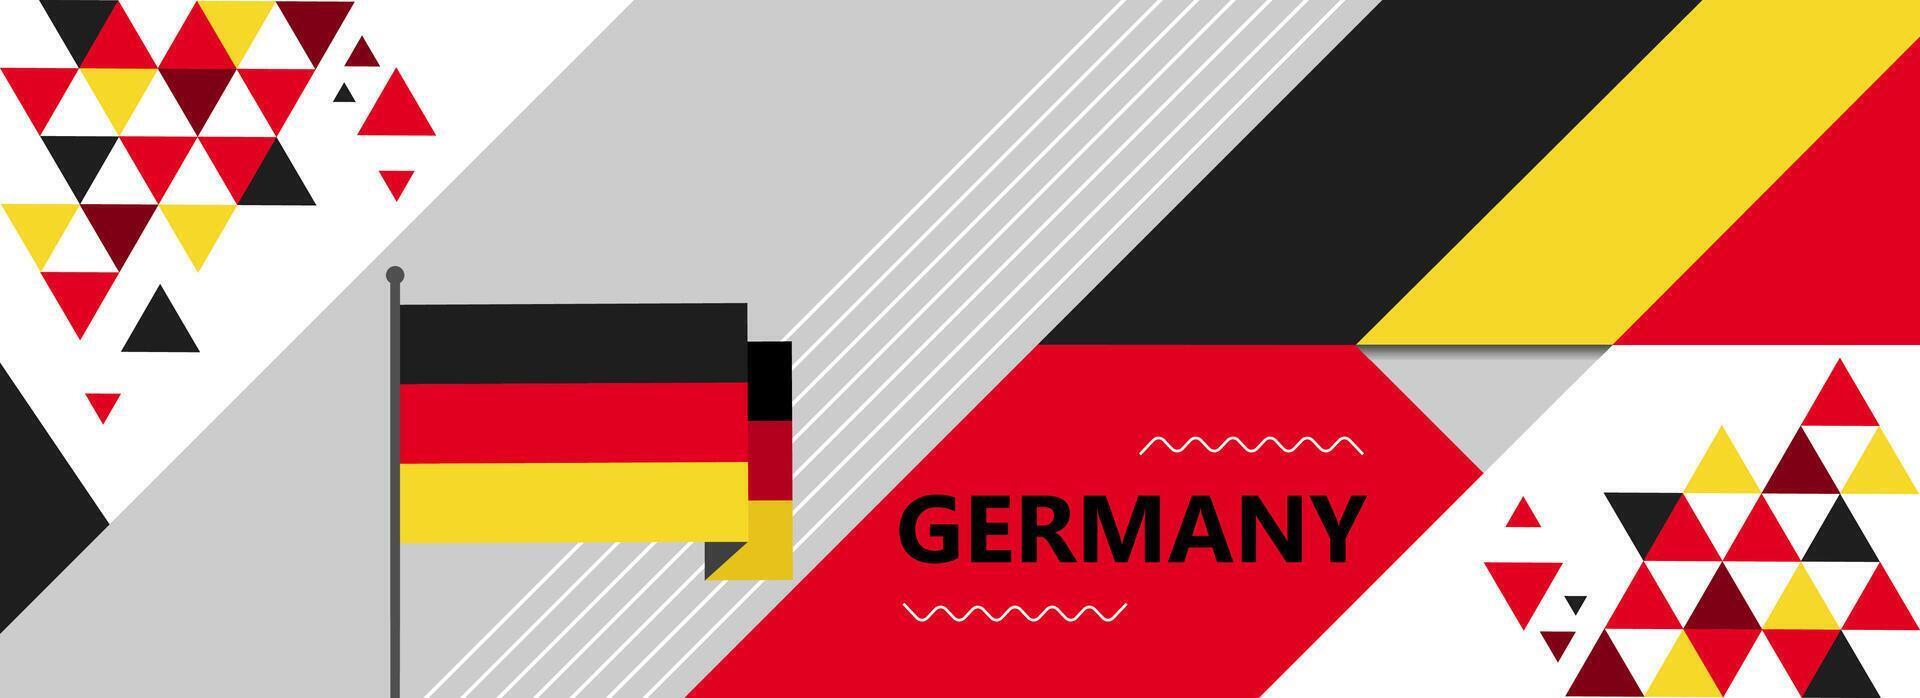 Germany national or independence day banner design for country celebration. Flag of Germany modern retro design abstract geometric icons. Vector illustration